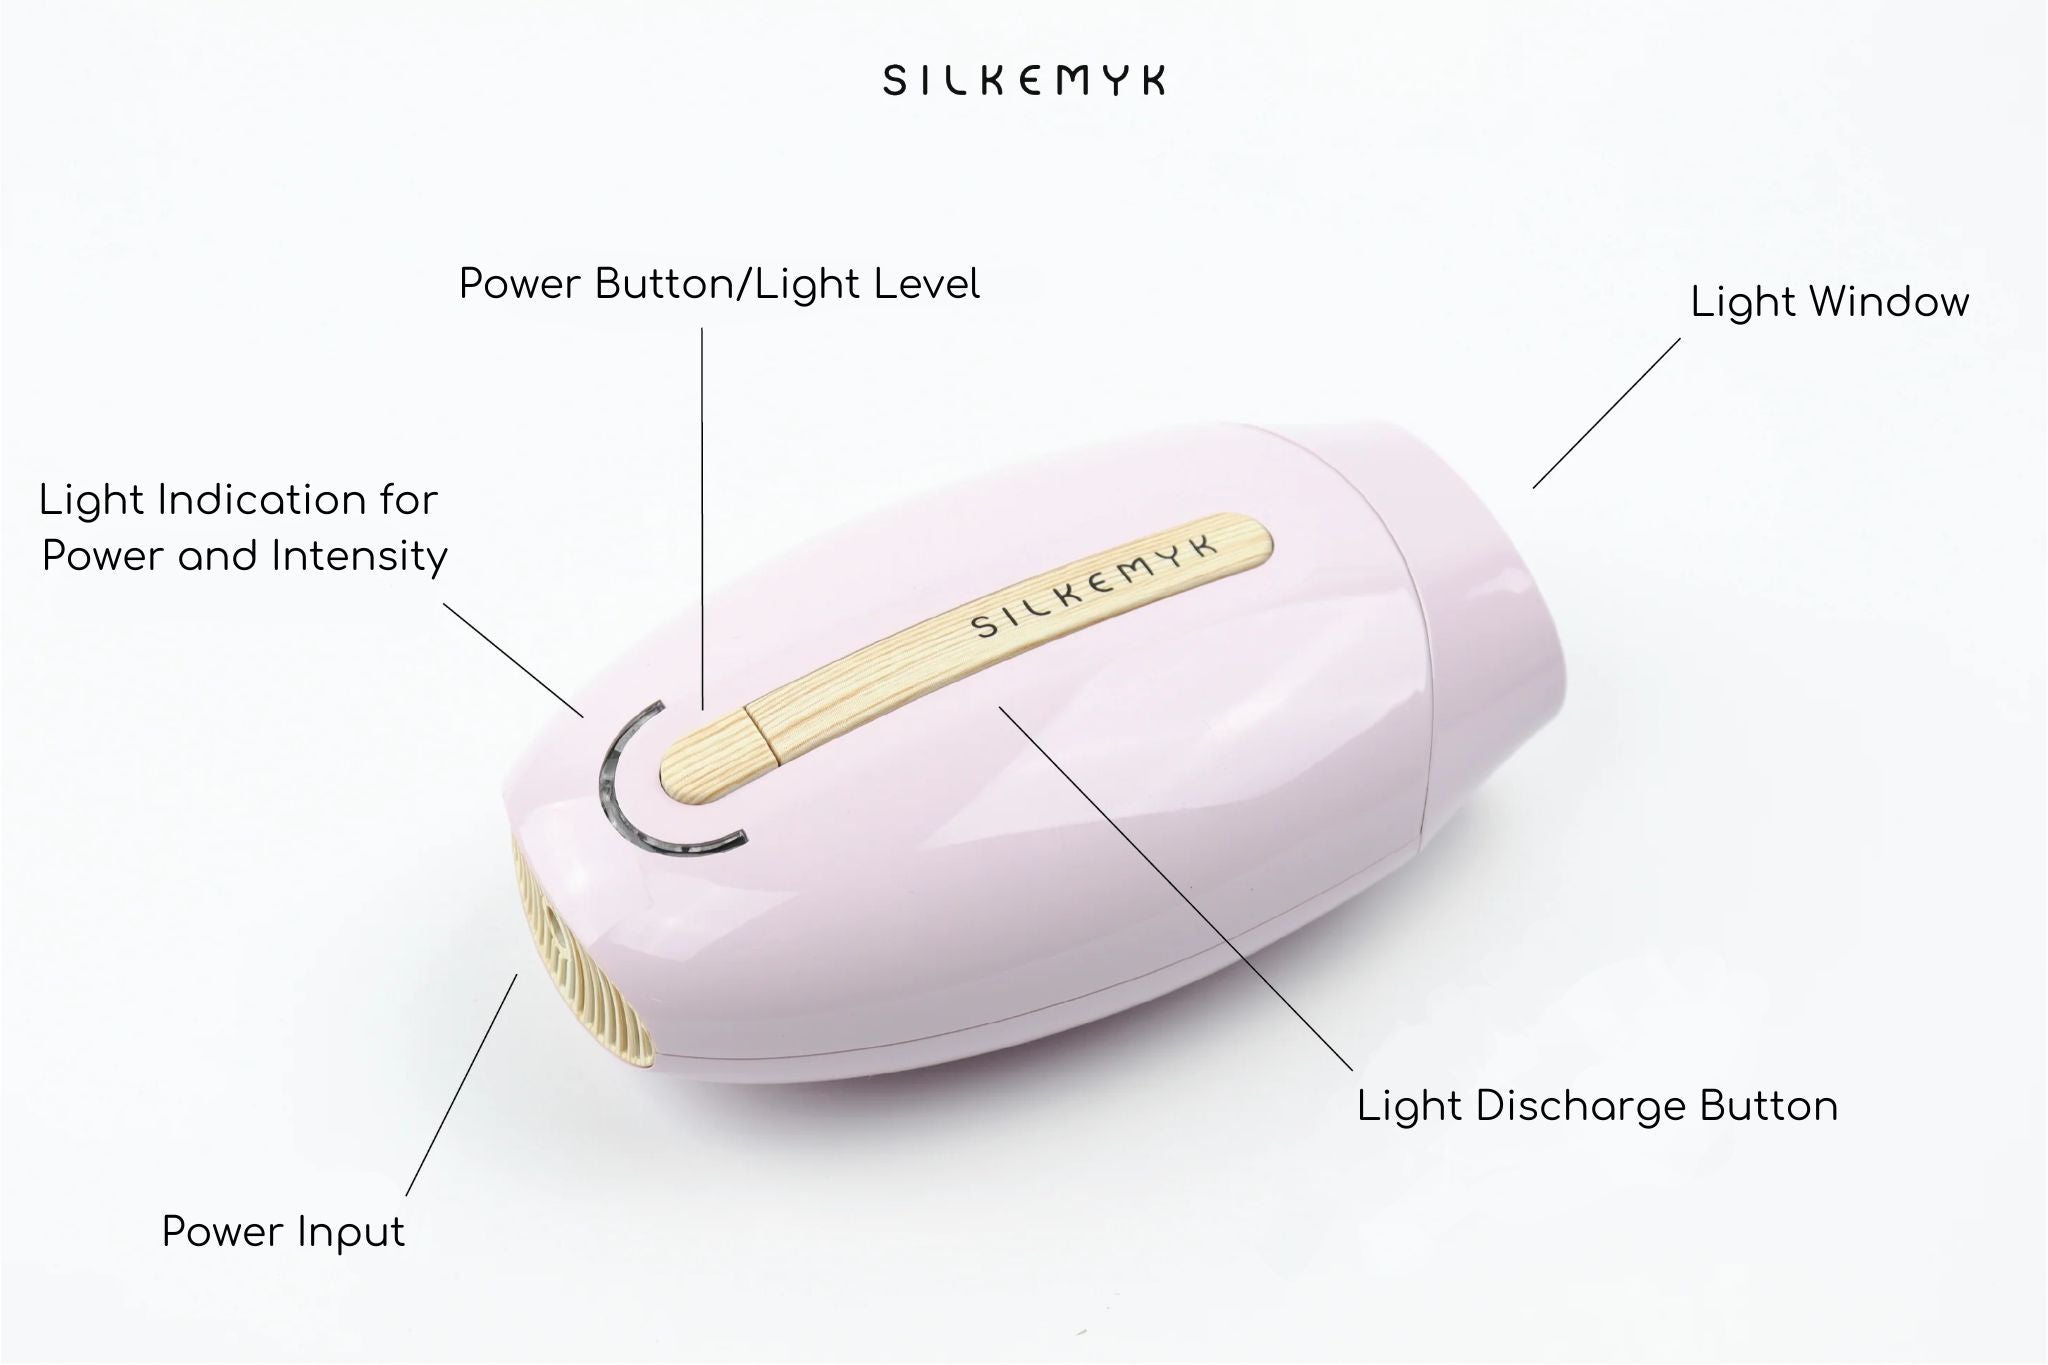 Components of a light therapy device including power buttonlight level, light window, light discharge button, power input, and light indication for power and intensity.